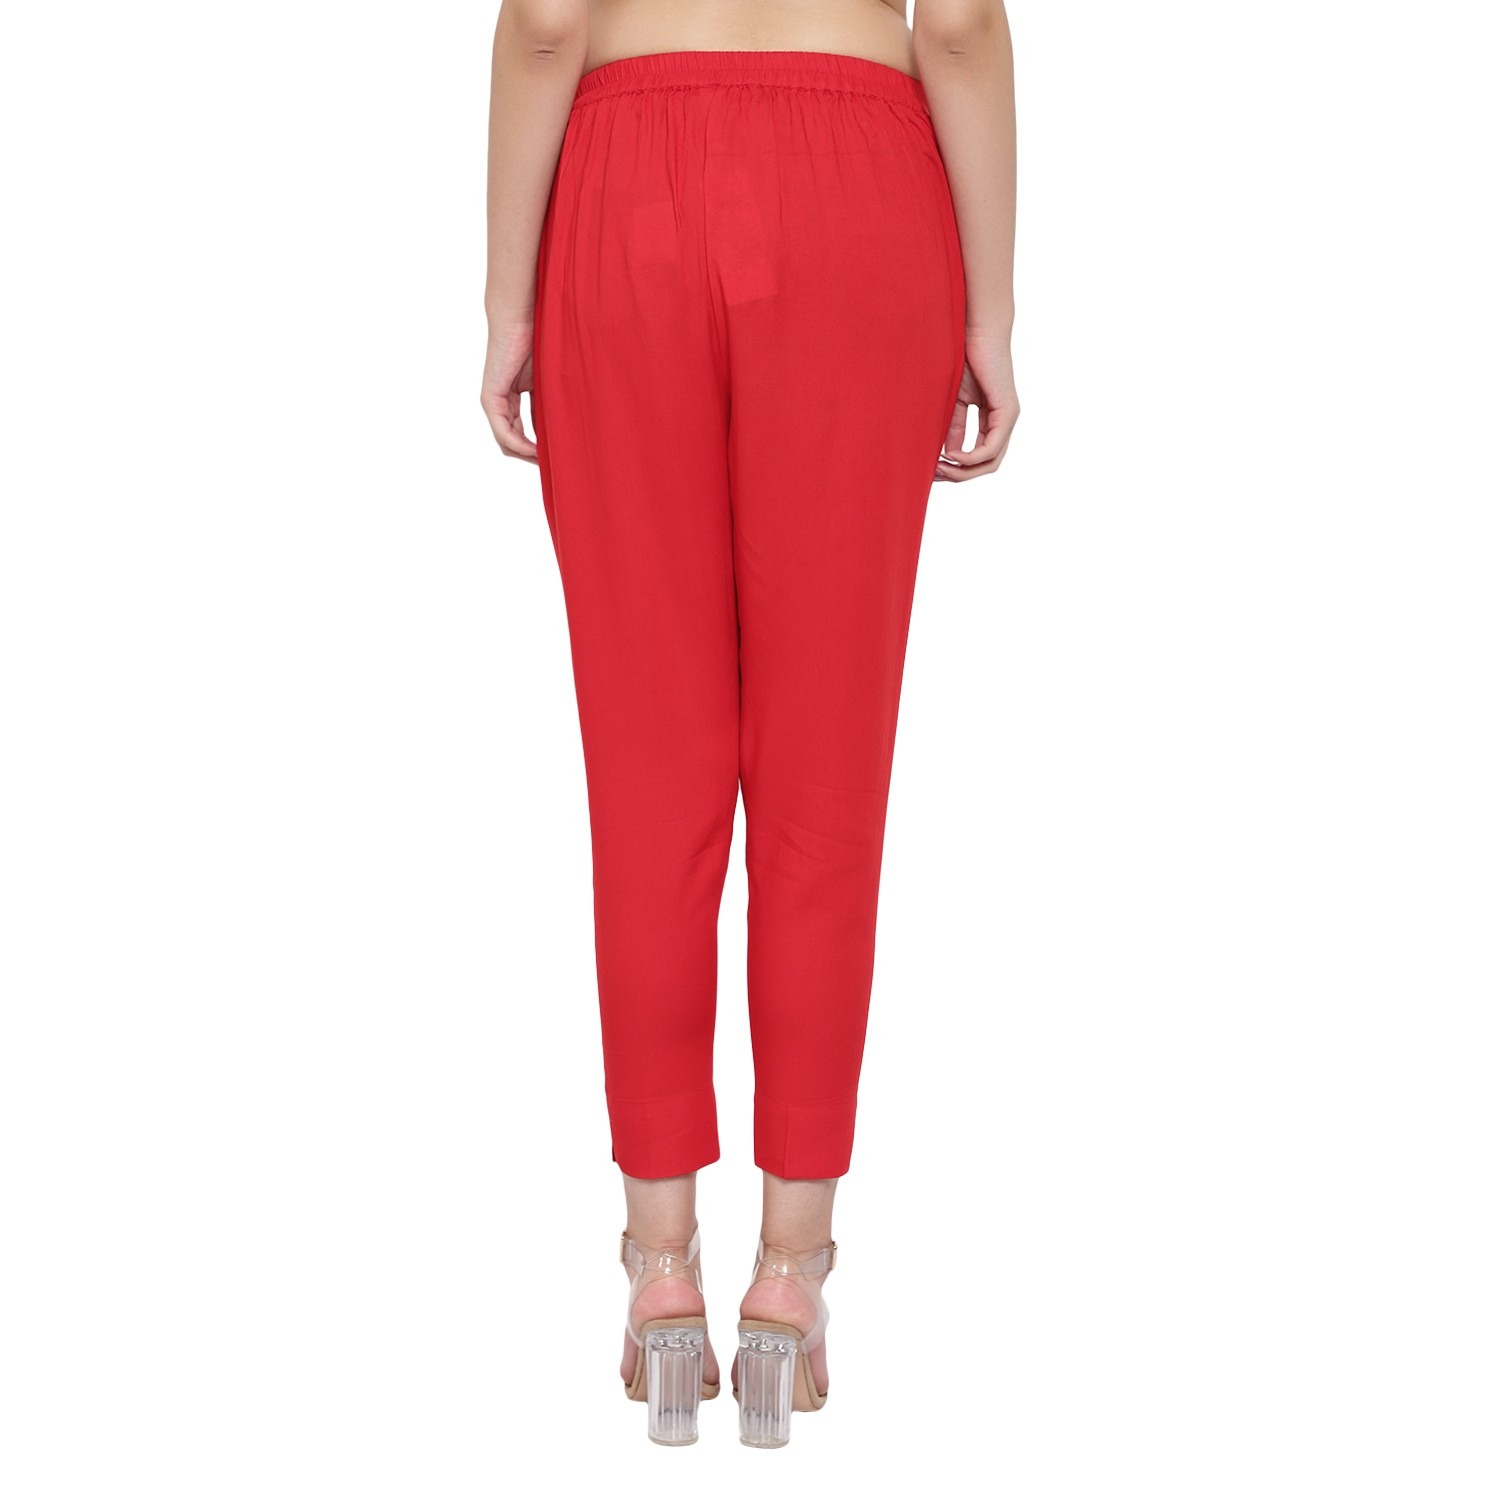 Buy Girls' Red Trousers Online | Next UK